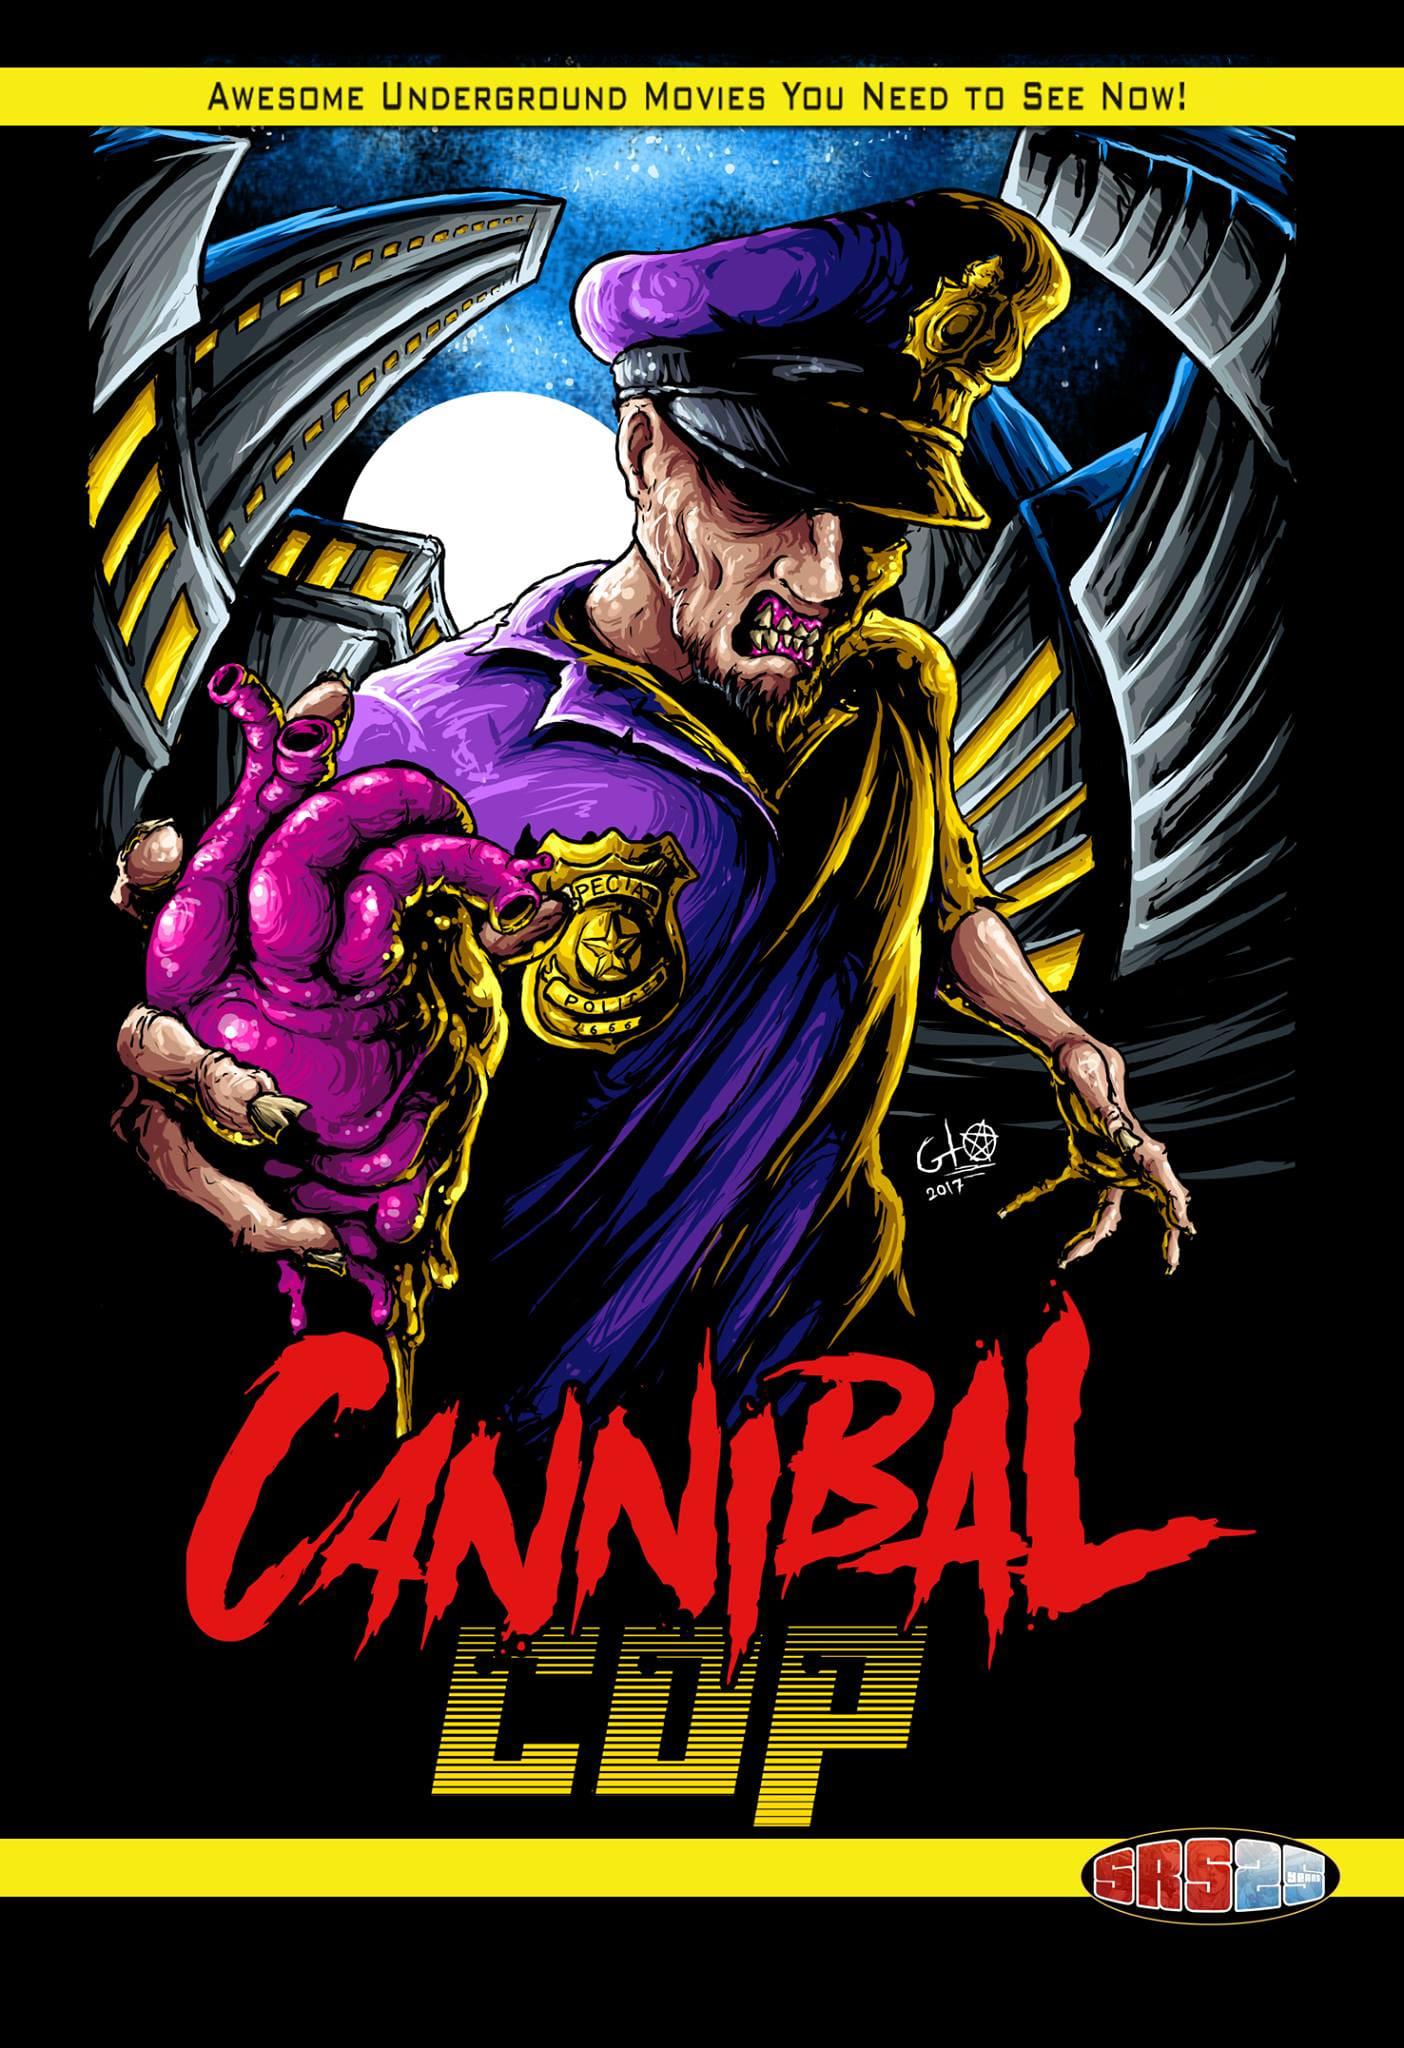 Cannibal Cop poster